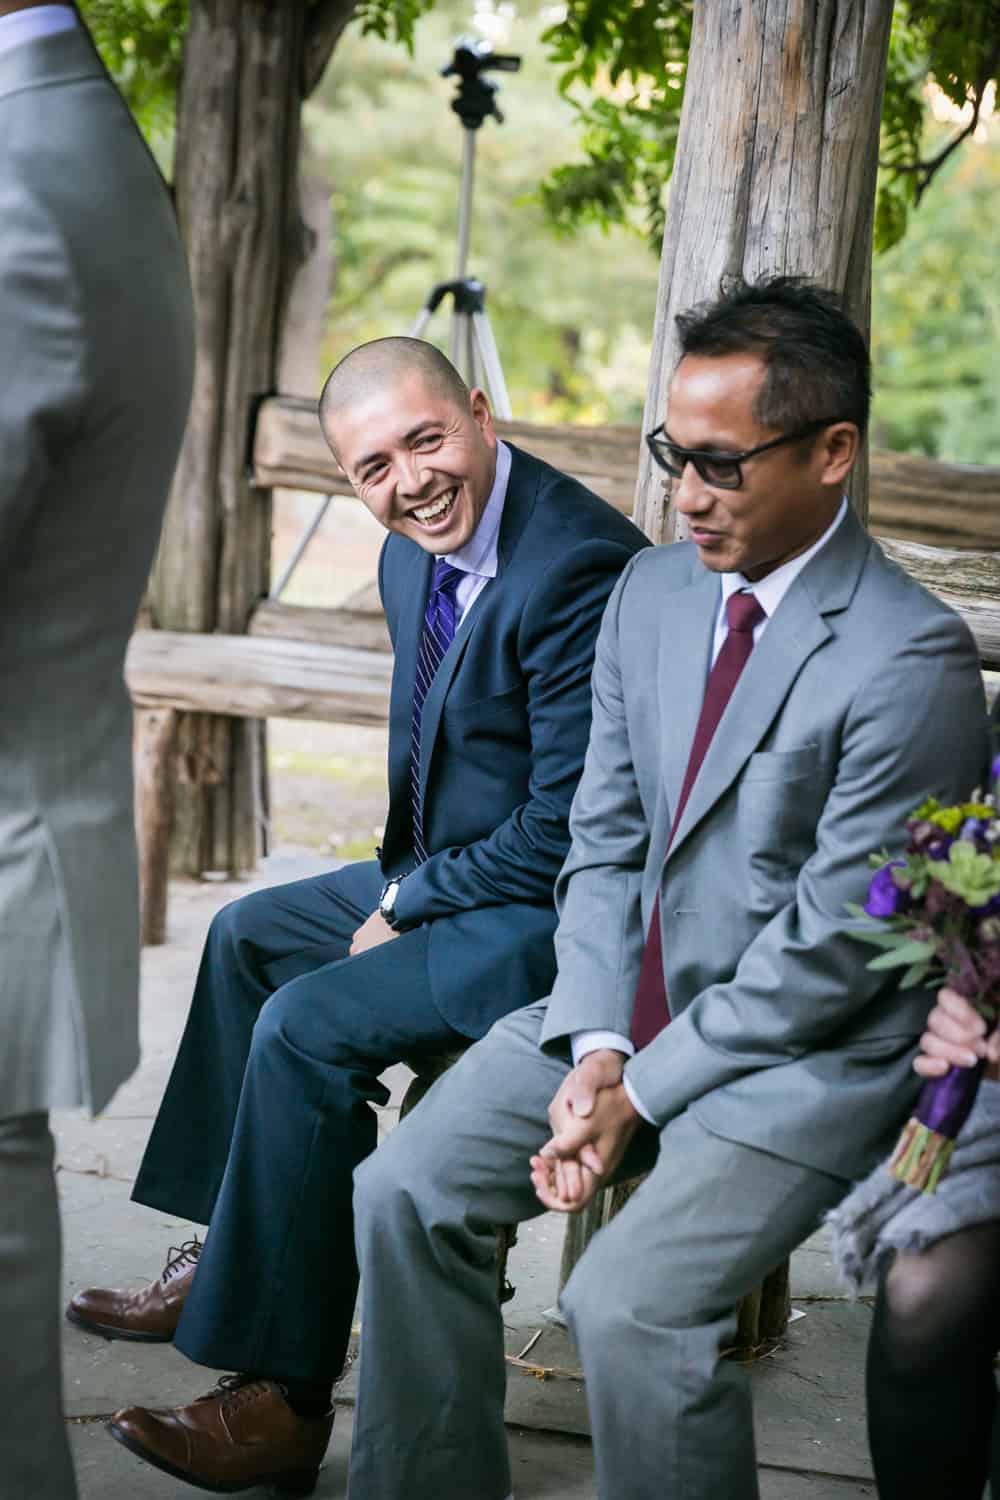 Two male guests laughing in Cop Cot wedding